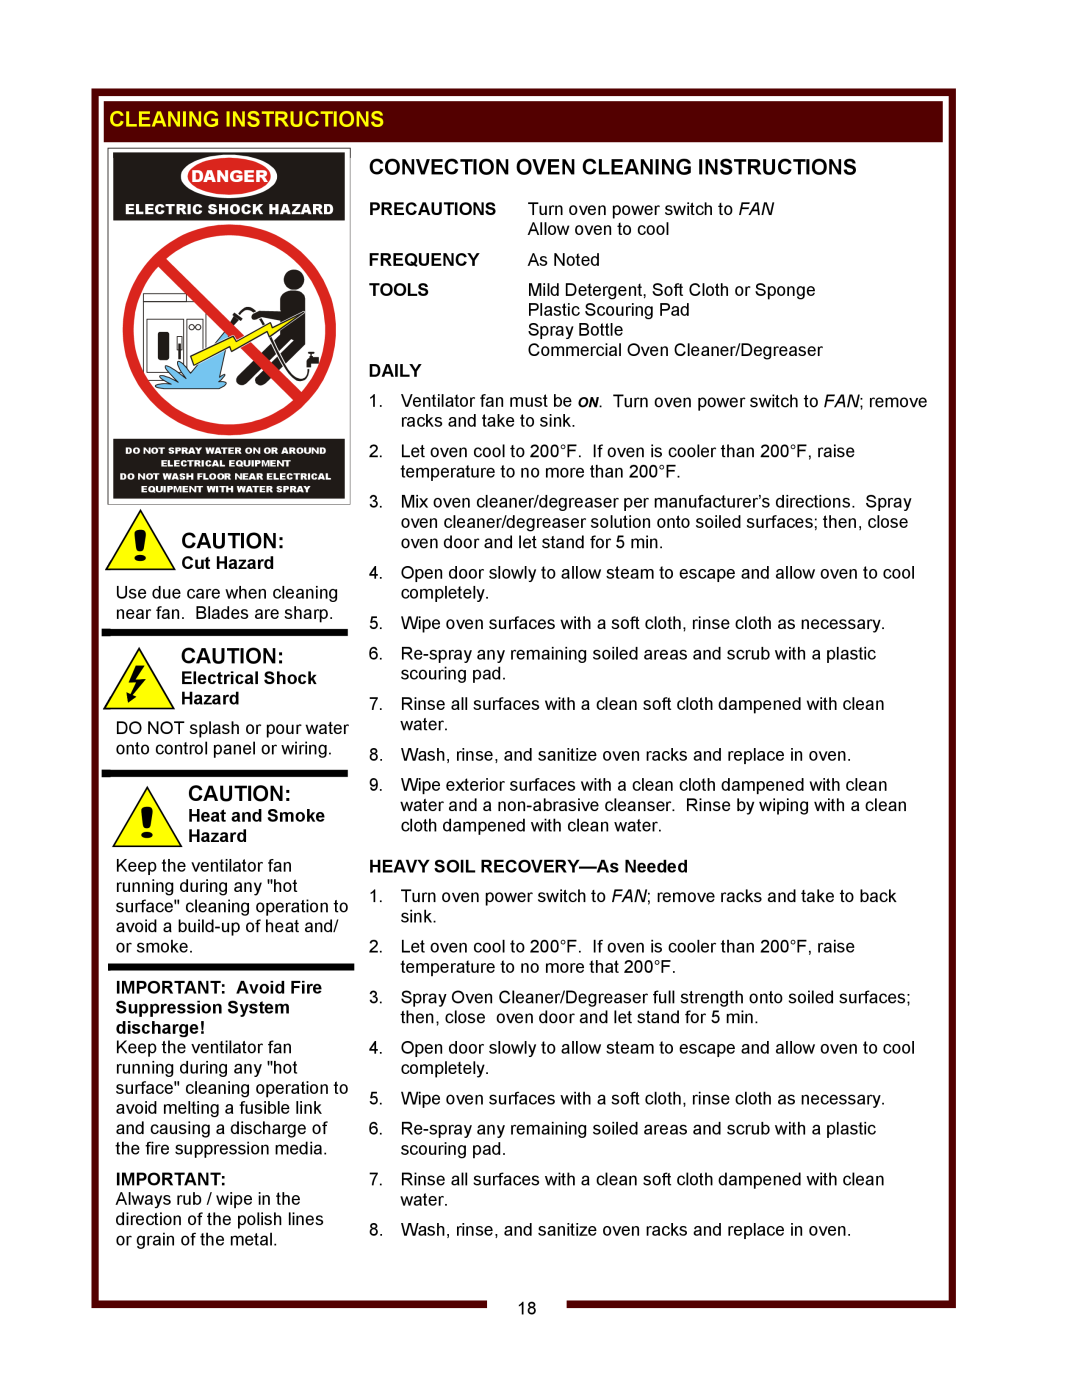 Bloomfield WVOC-2HSG Convection Oven Cleaning Instructions, Cut Hazard, Electrical Shock Hazard, Heat and Smoke Hazard 